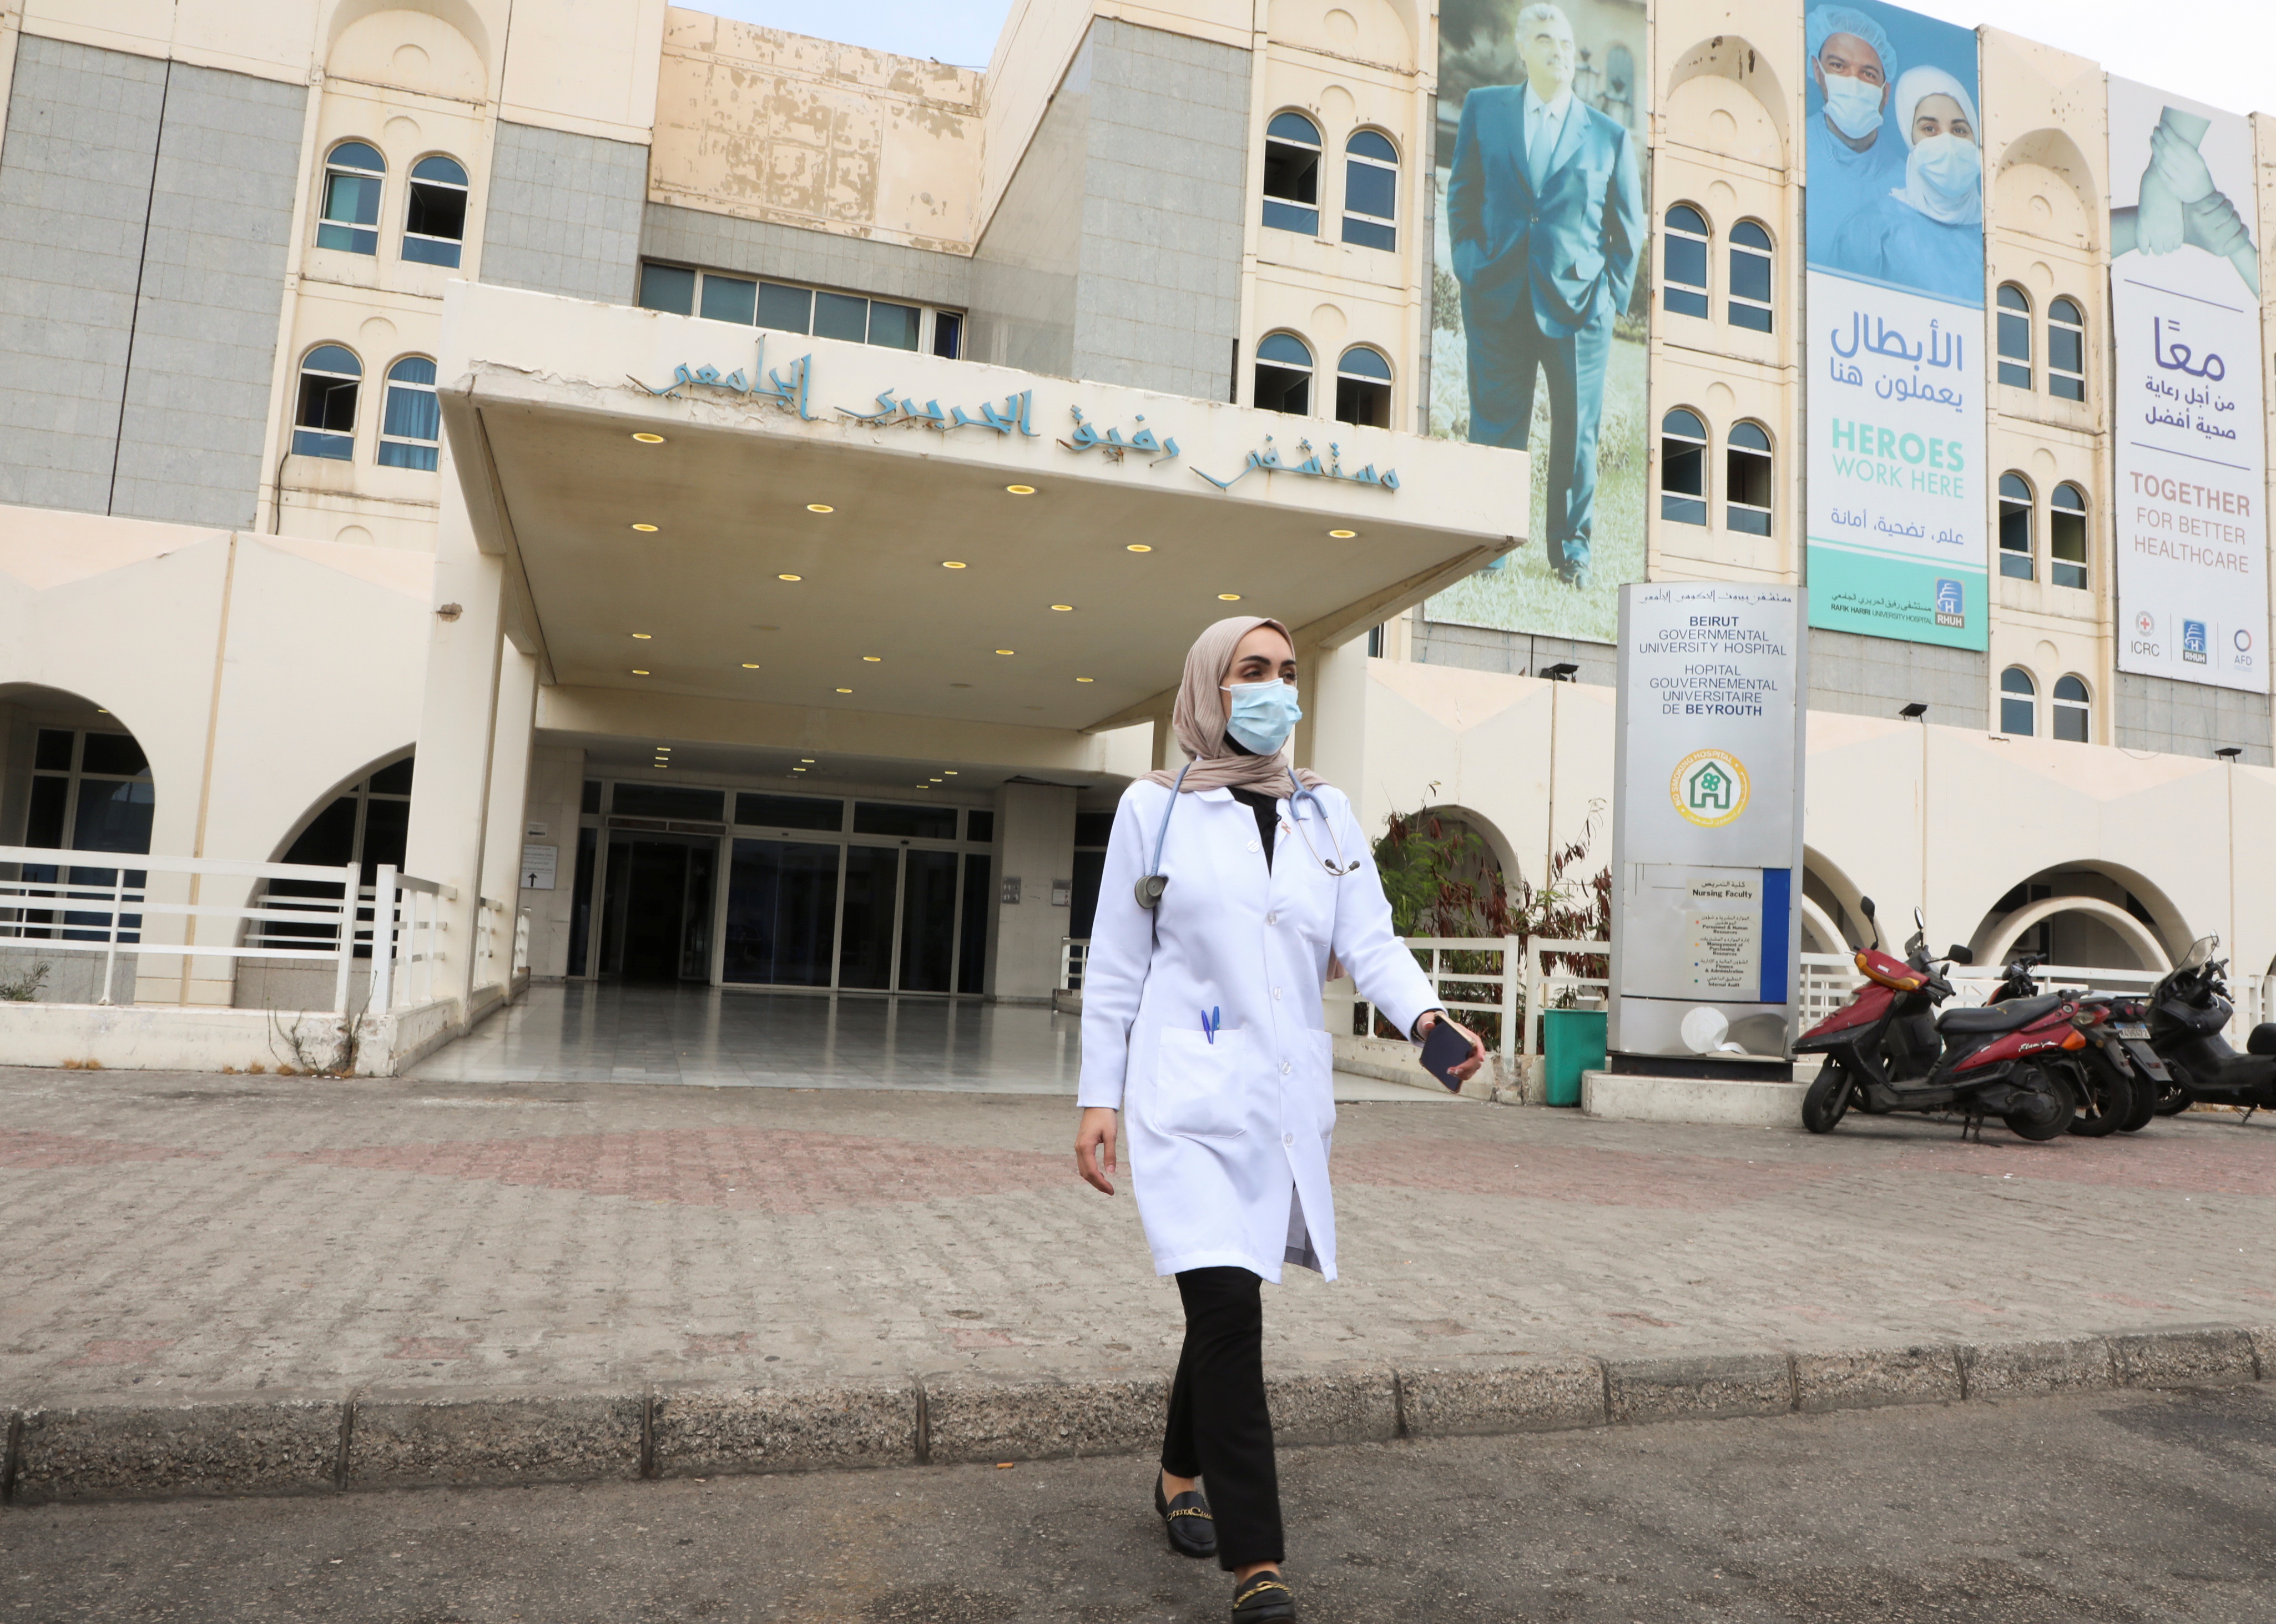 Israa Seblani, a Lebanese doctor and the bride who was caught up in the last year's Beirut port blast during a wedding photoshoot, walks outside Rafik Hariri University Hospital, in Beirut